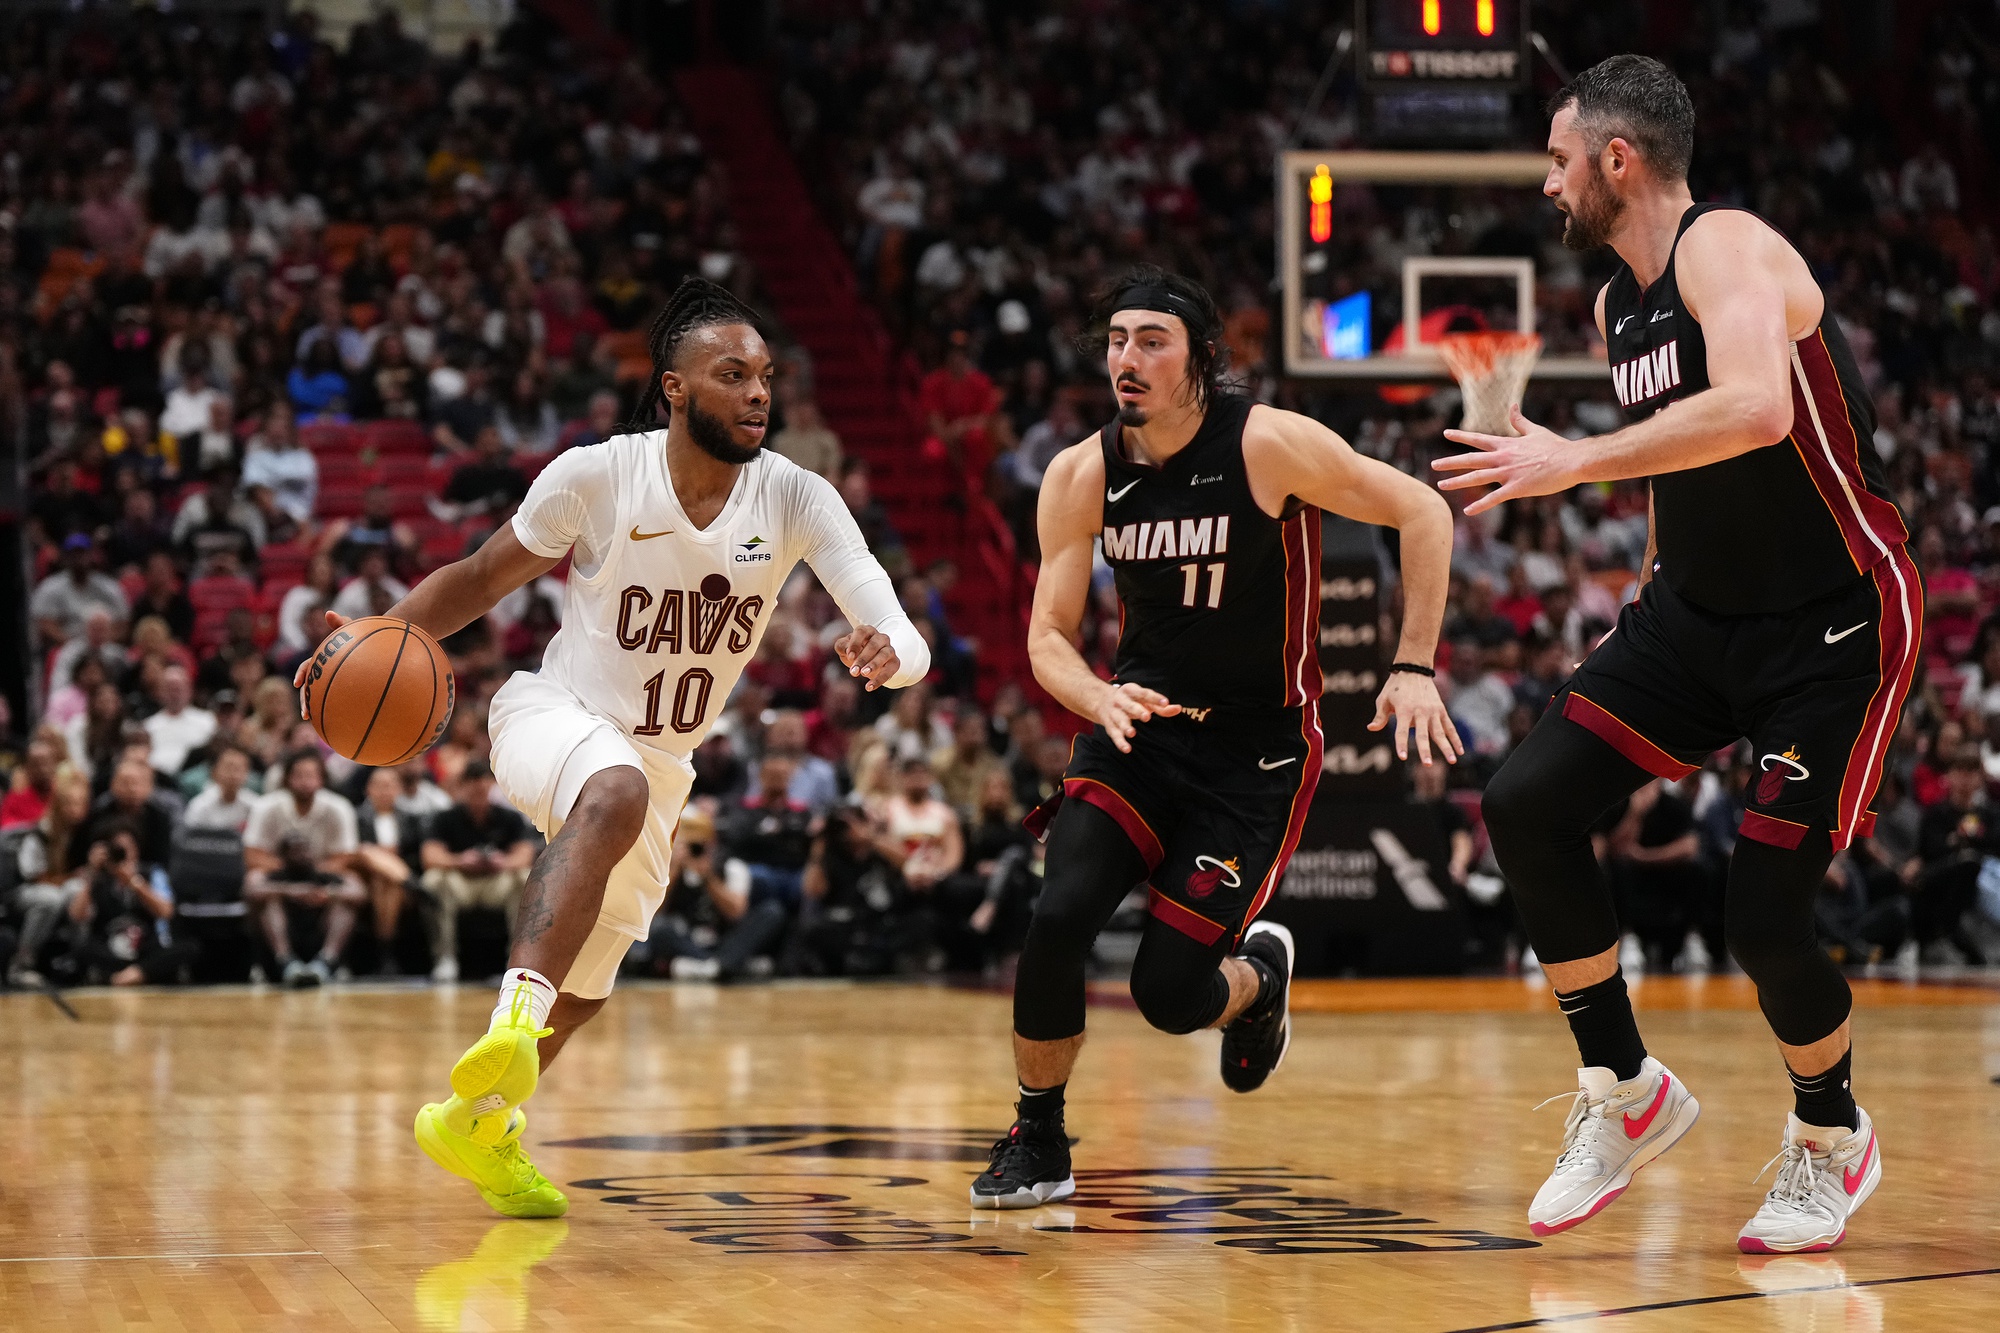 The Cavs and Heat are featured in our best bets of the day.